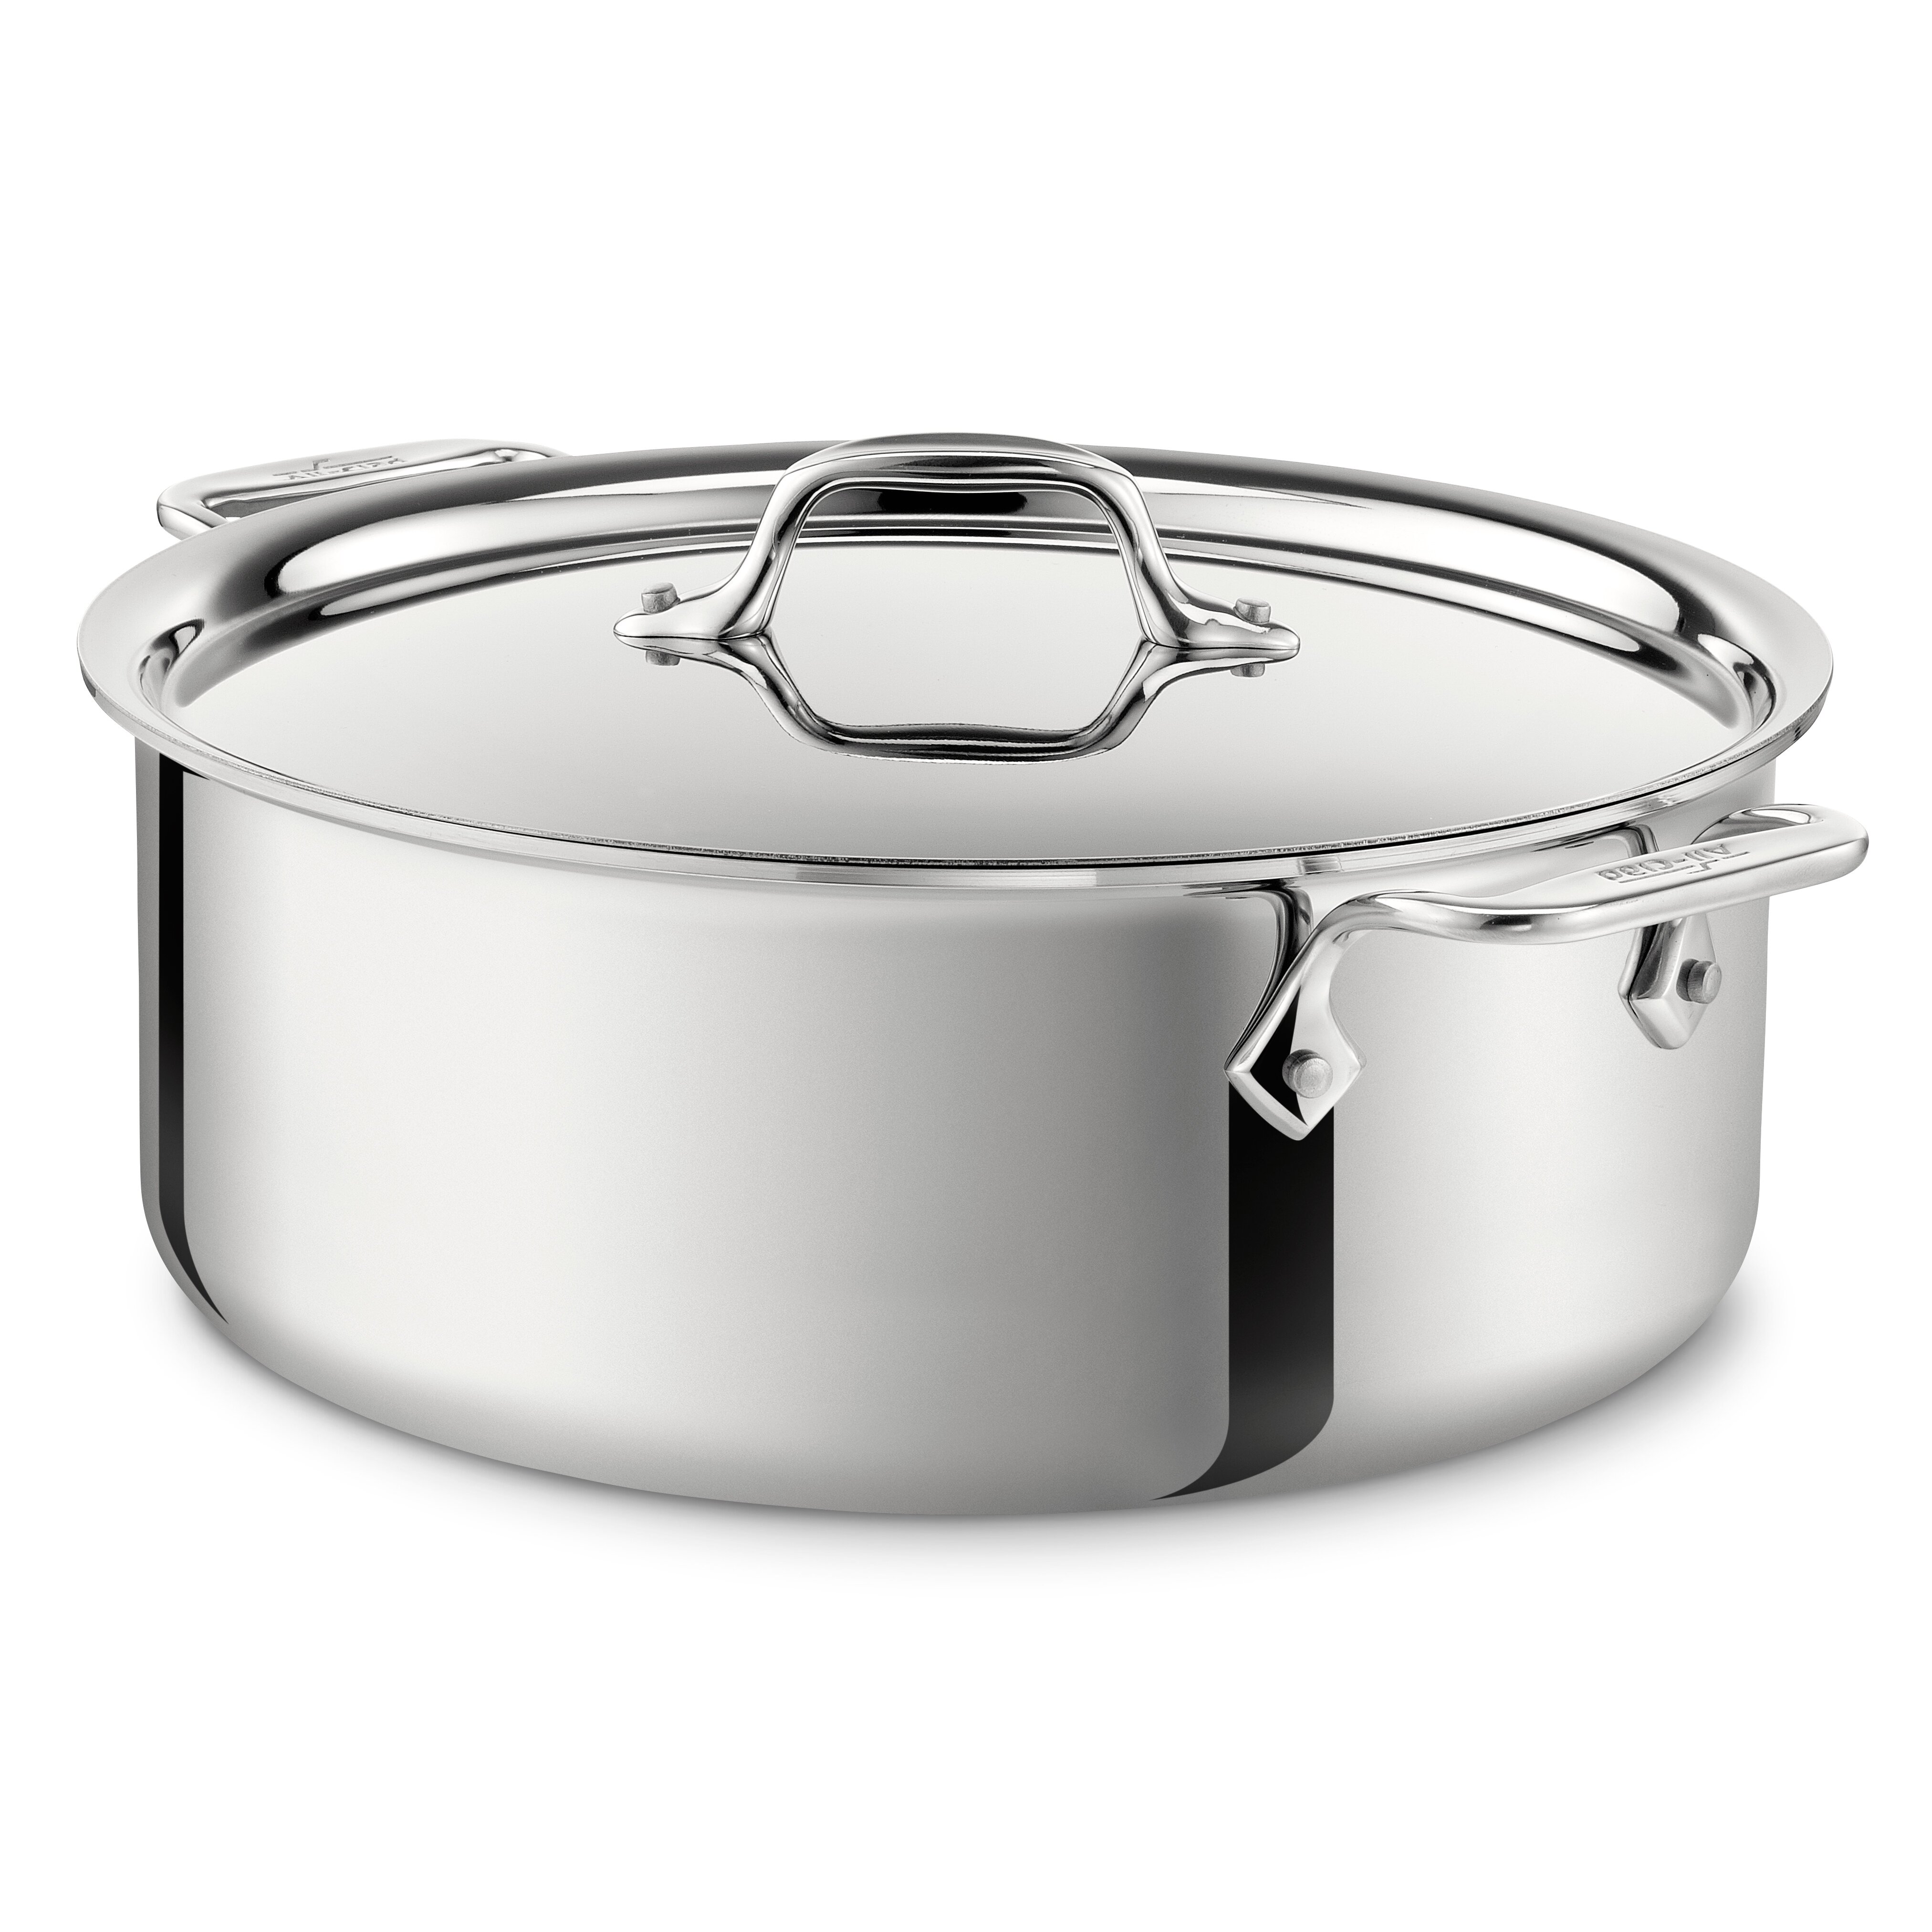 All-Clad Stainless Steel Stock Pot with Lid & Reviews | Wayfair